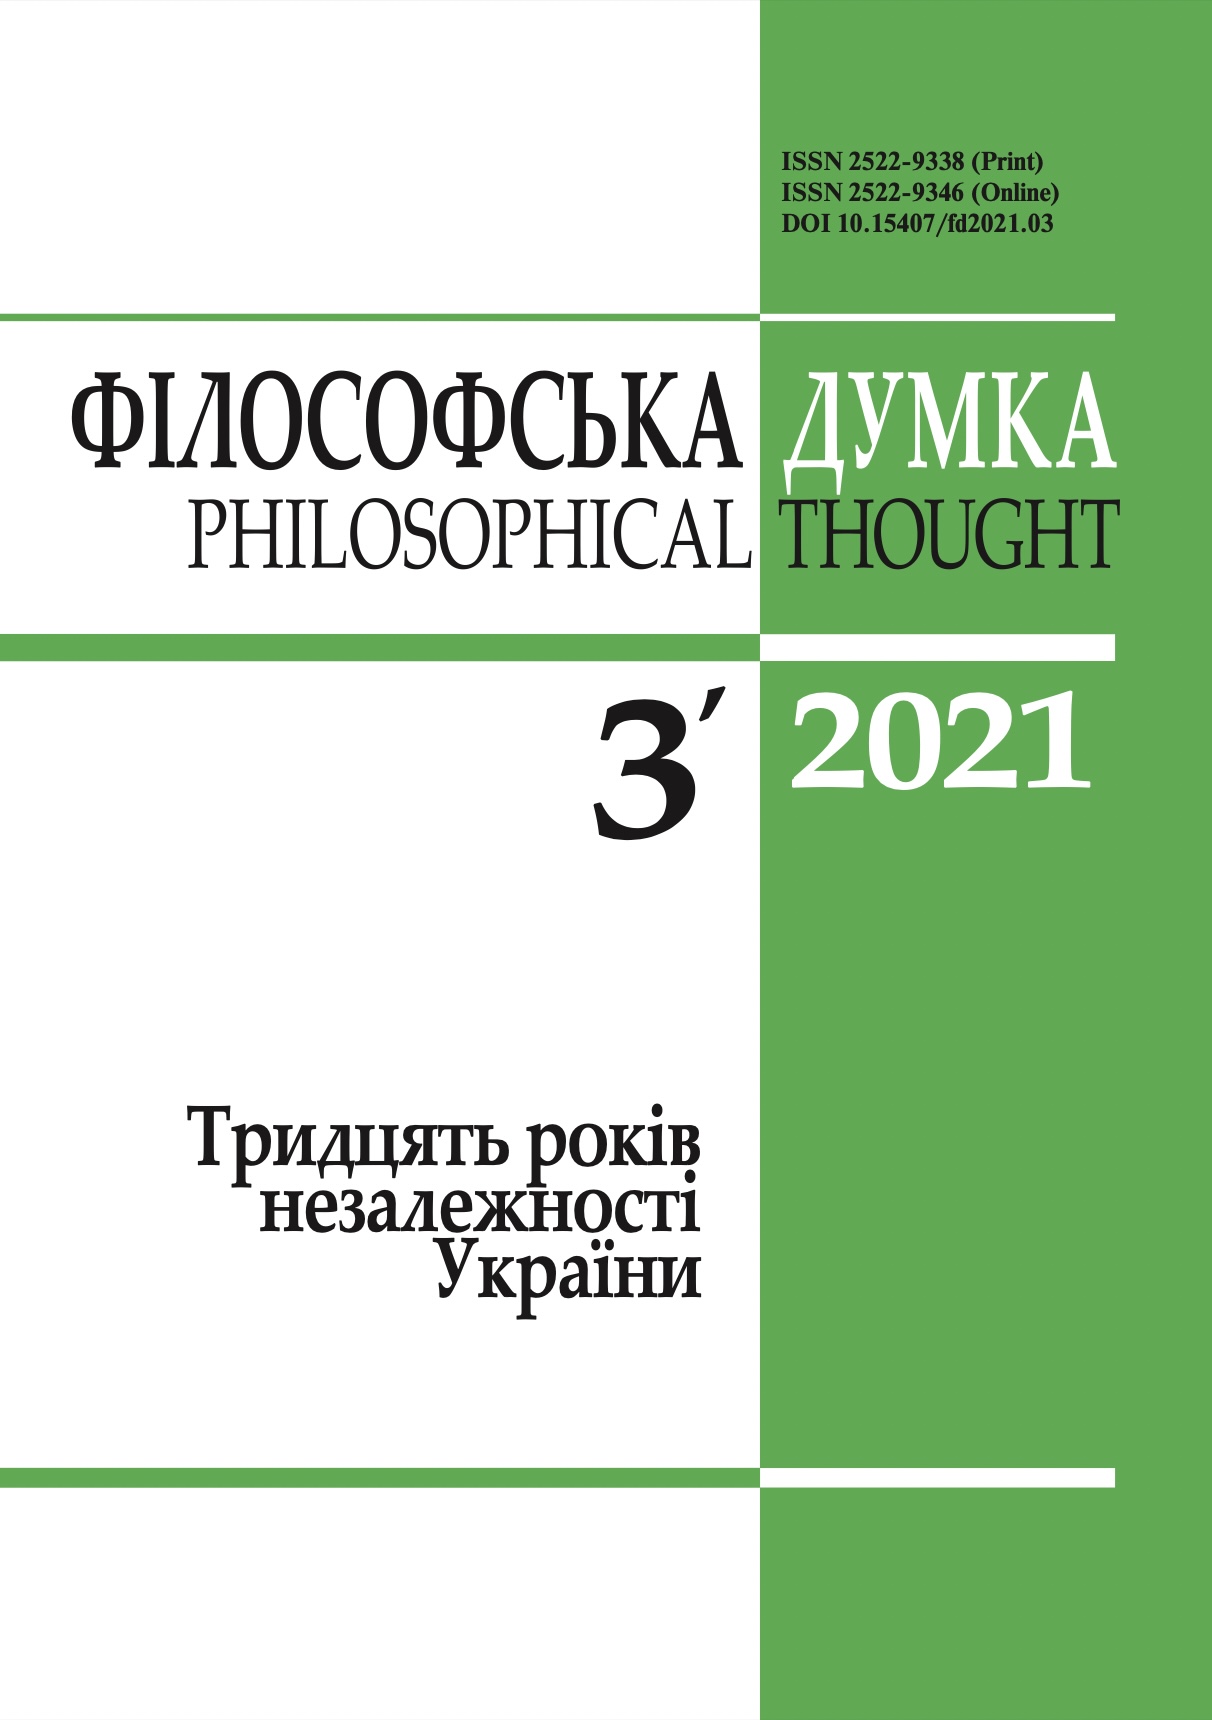 					View No. 3 (2021): Philosophical thought
				